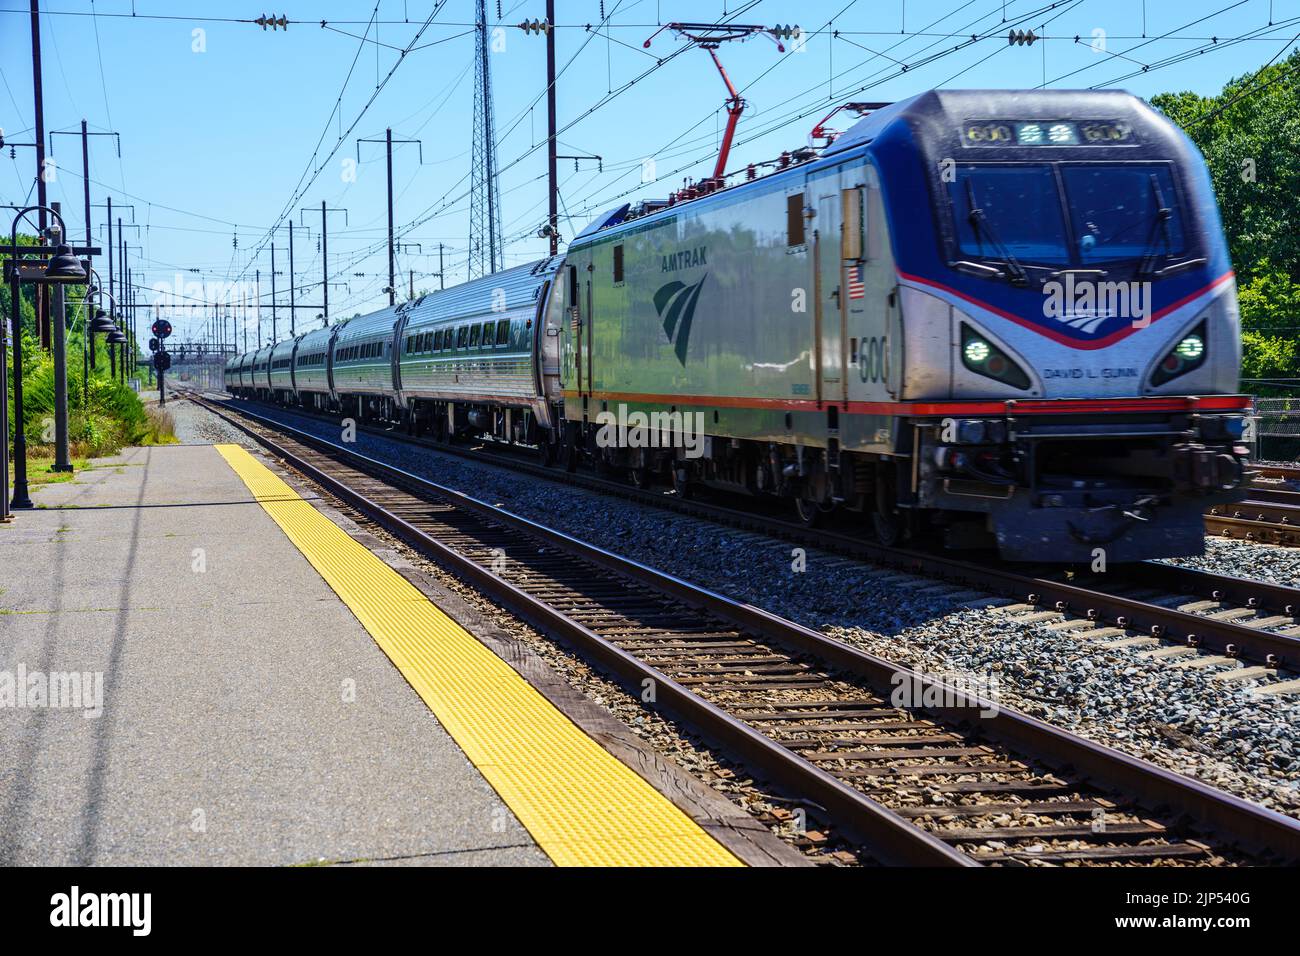 Perryville, MD, USA – August 13, 2022: An Amtrak passenger train traveling through a small Maryland town about to cross over the Susquehanna River. Stock Photo